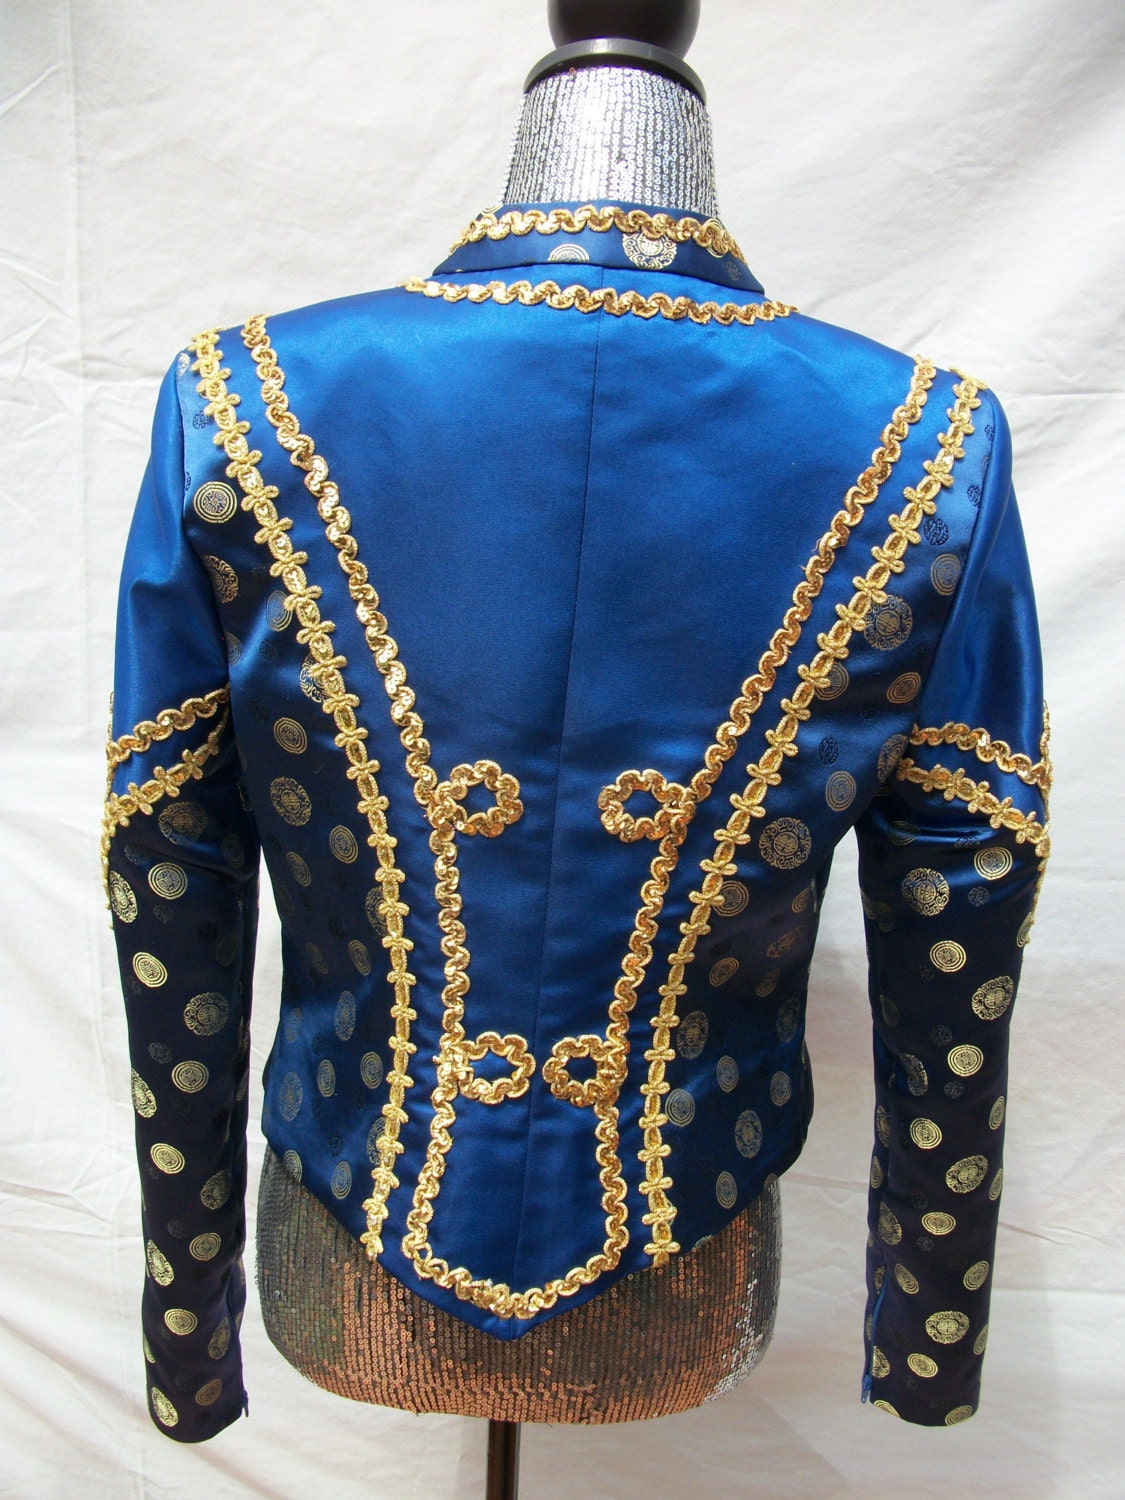 Blue Western Show Jacket With Gold Medallion Print. | Etsy